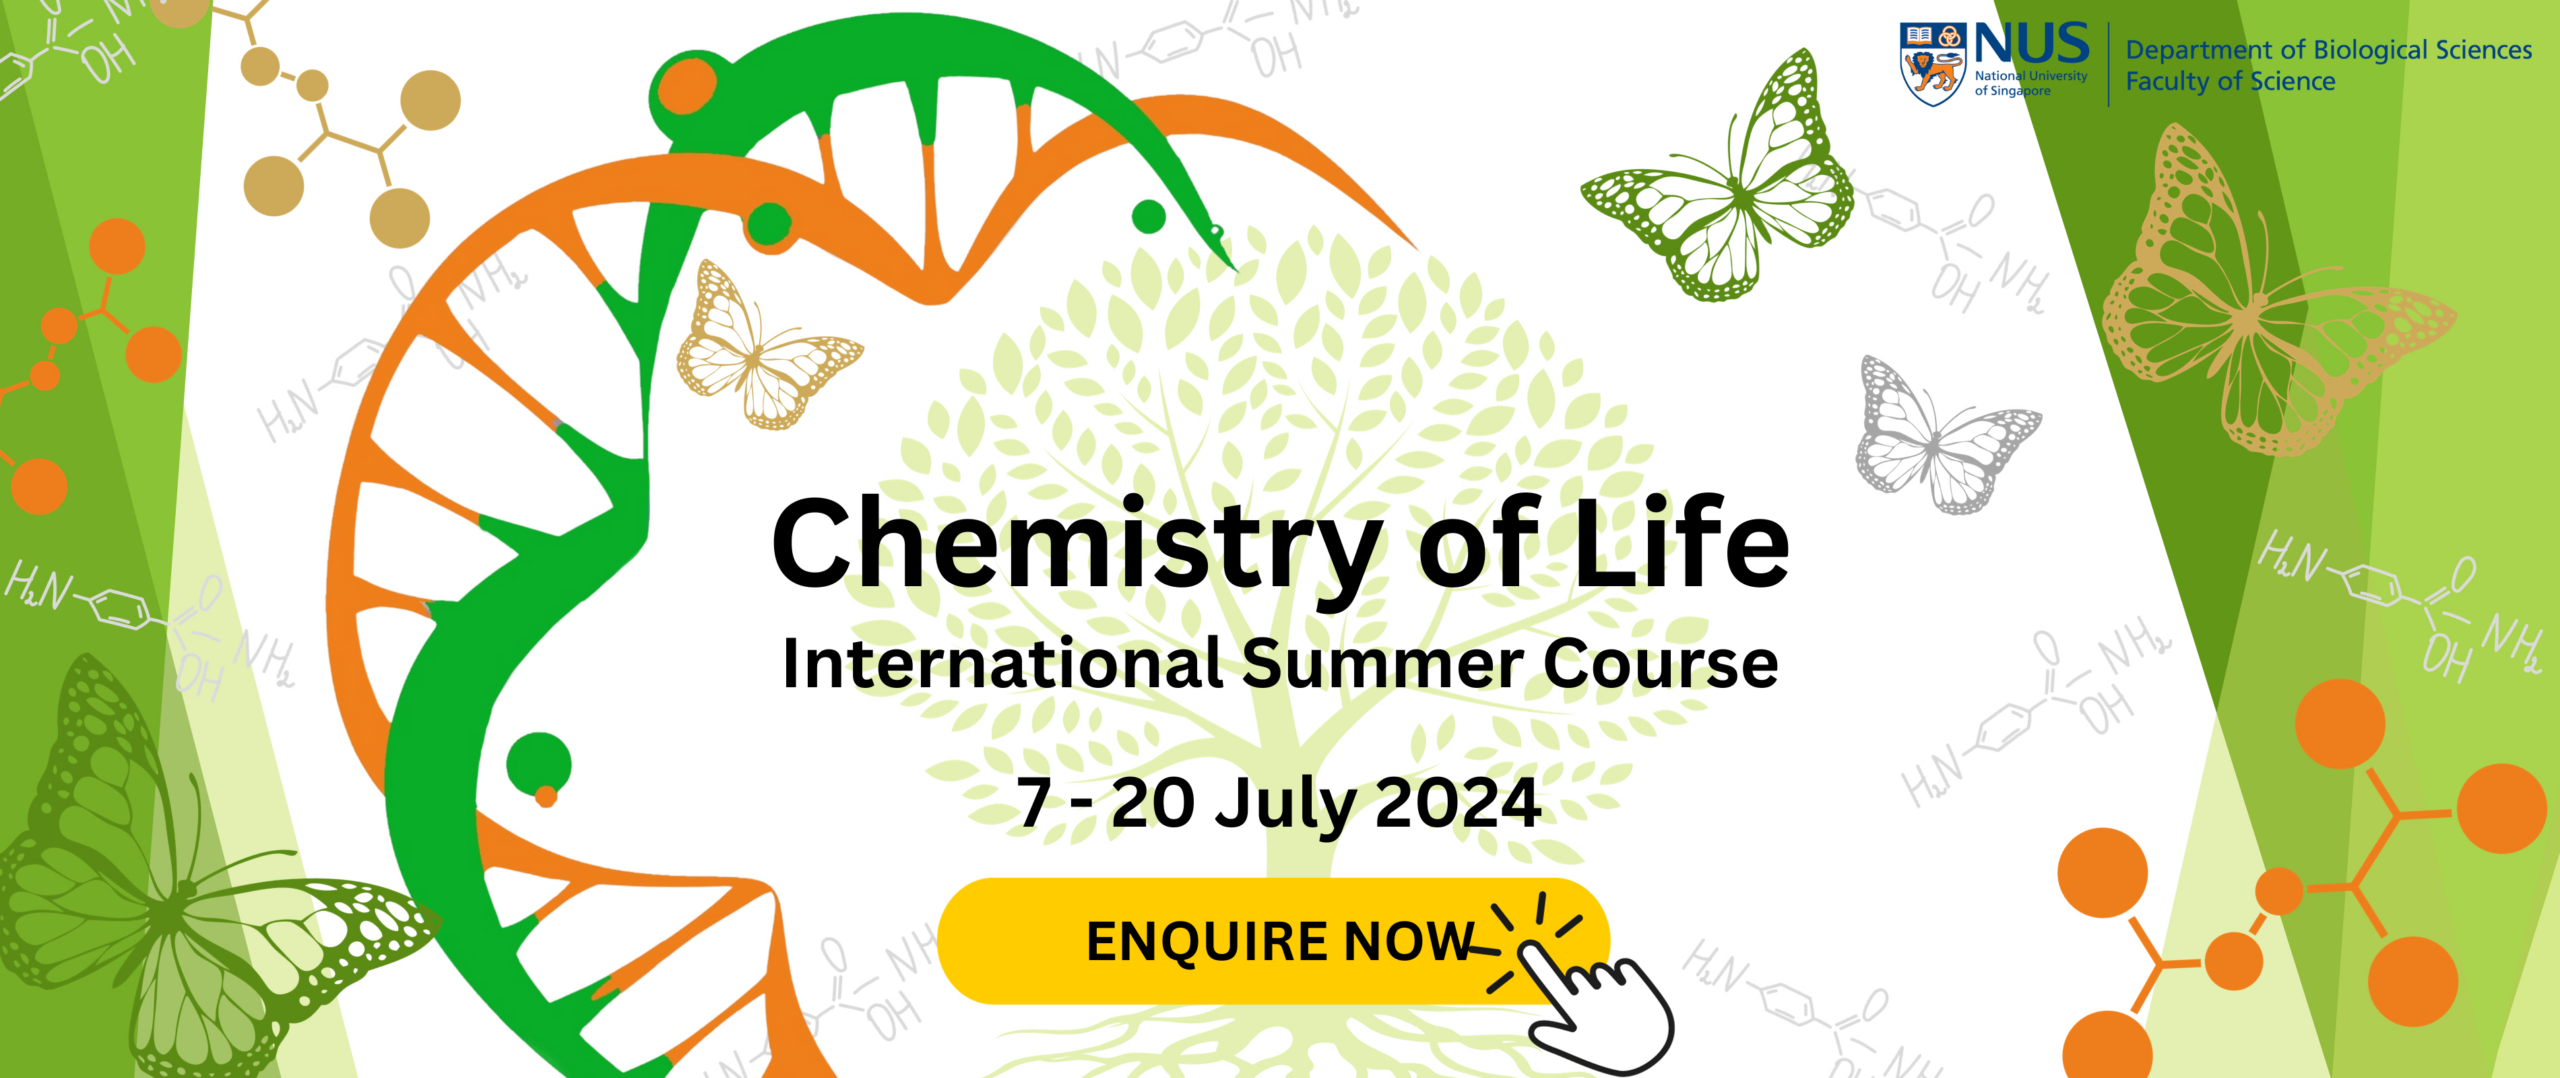 DBS Summer Course 2024 – Chemistry of Life | 7 – 20 July 2024